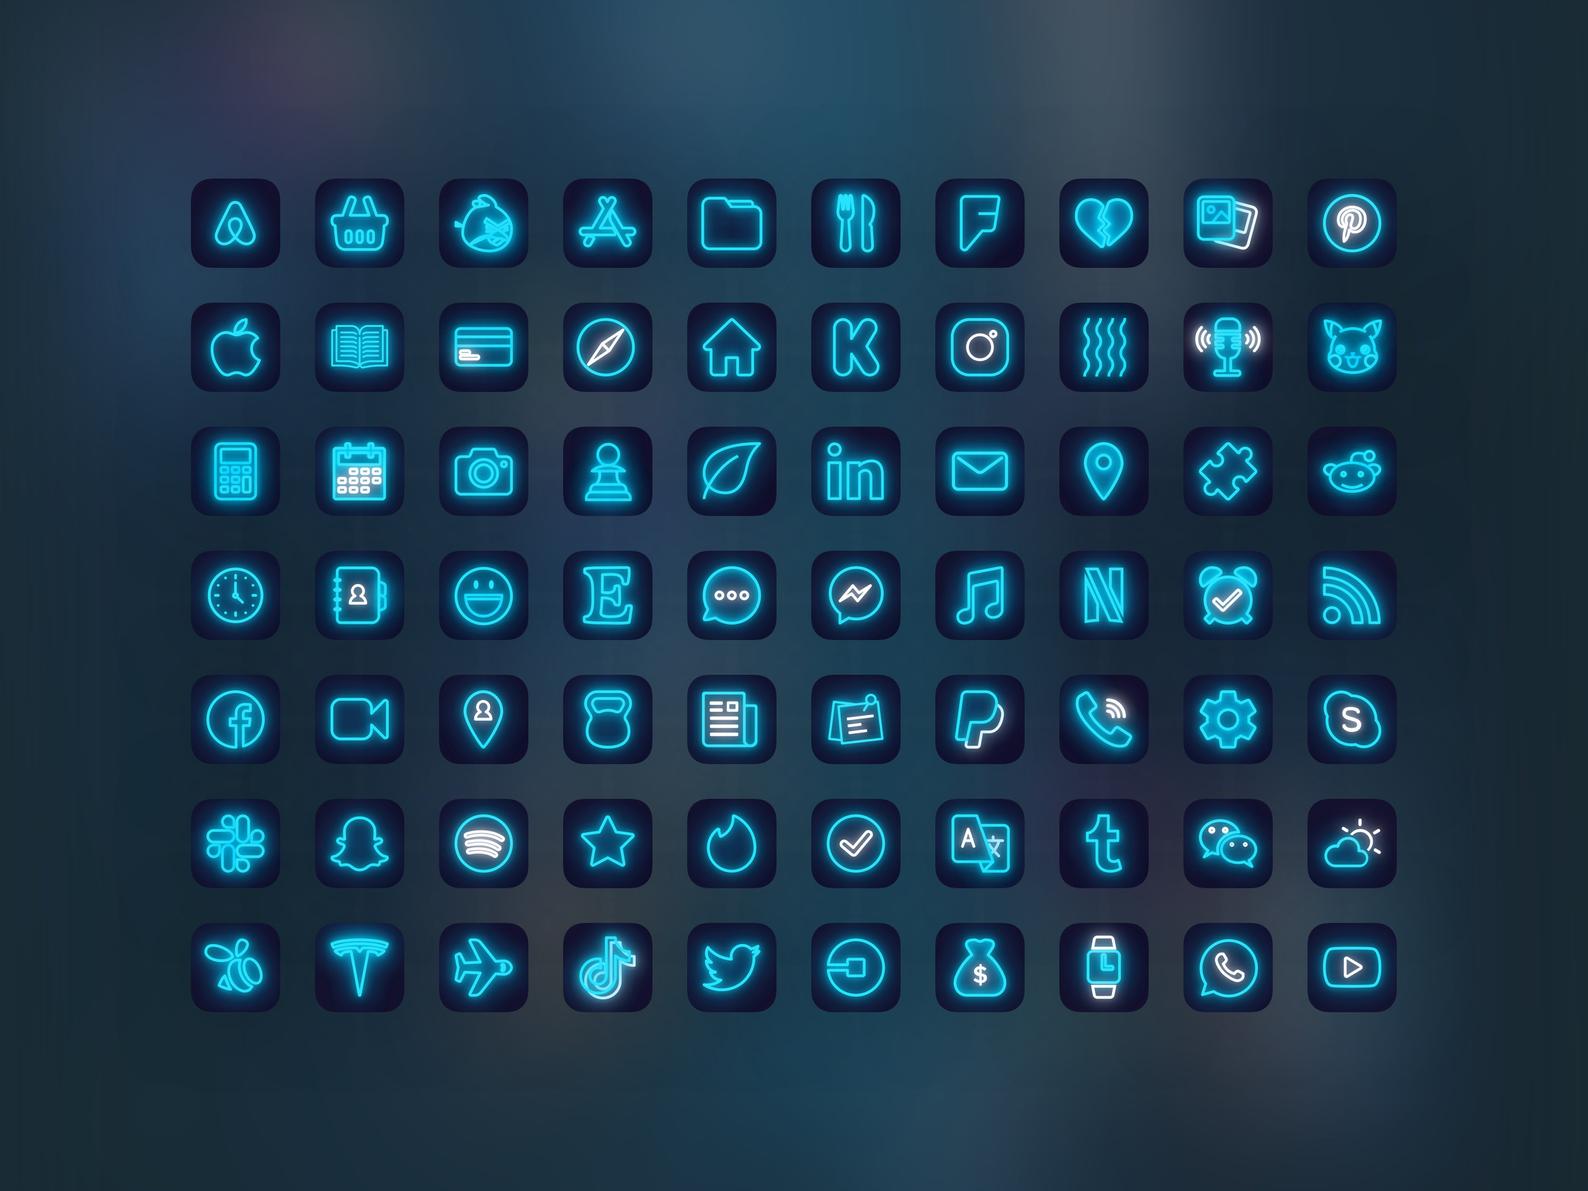 70 Ios 14 App Icon Pack Turquoise Aqua Blue Neon Aesthetic For Iphone Home Screen Get free icons of facetime in ios, material, windows and other design styles for web, mobile, and graphic design projects. 70 ios 14 app icon pack turquoise